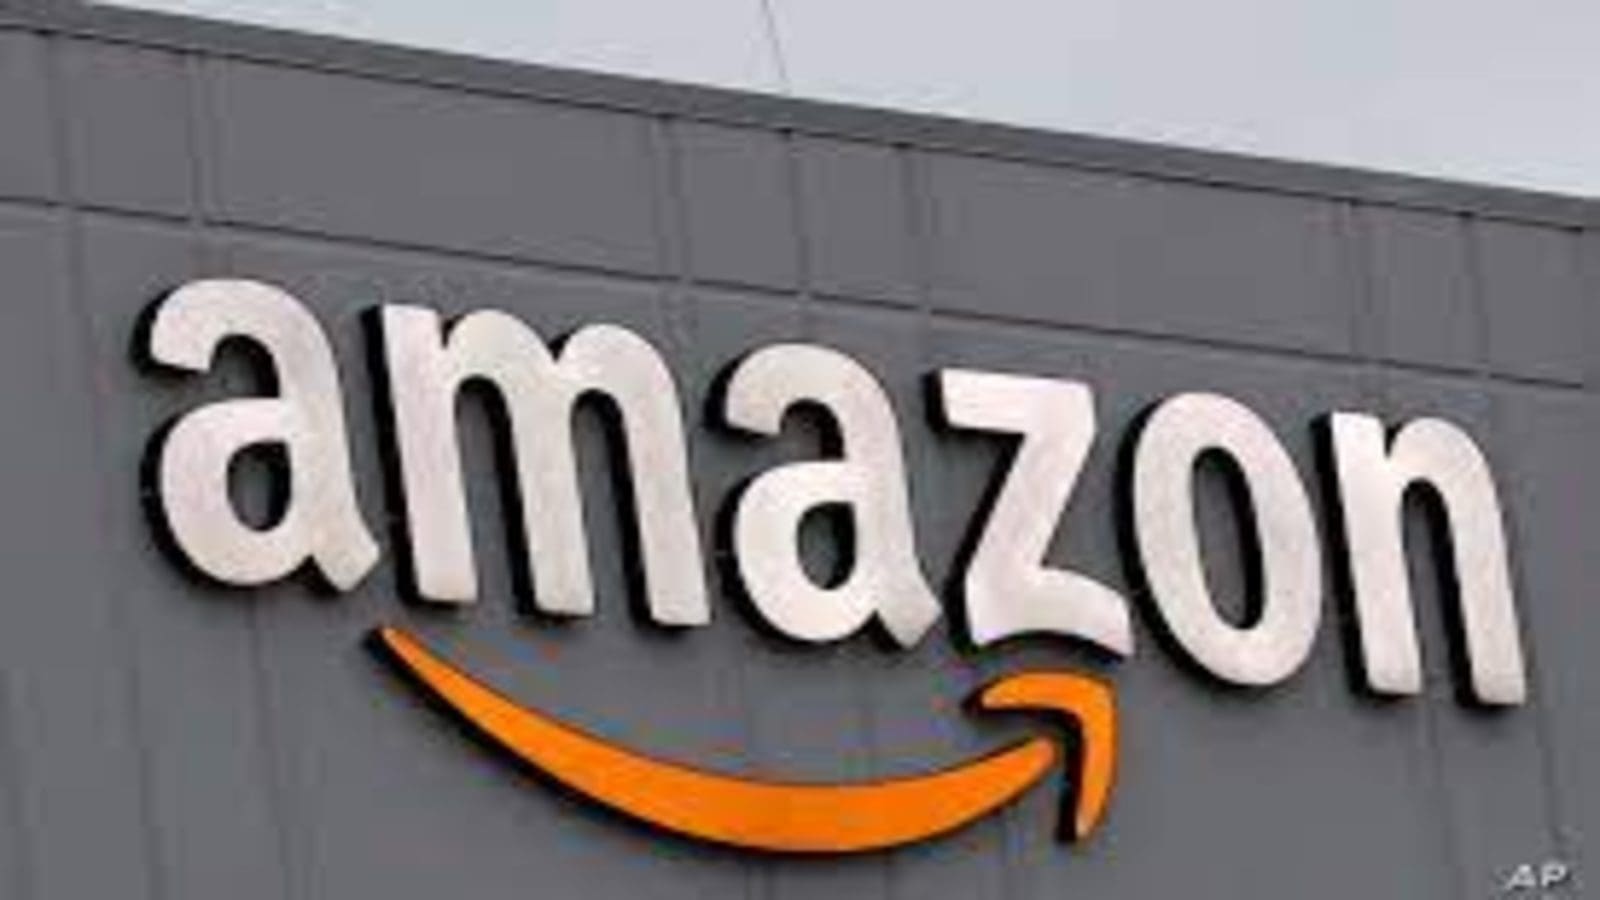 Amazon says altering India’s e-commerce investment rules could erode investor confidence, hurt small businesses